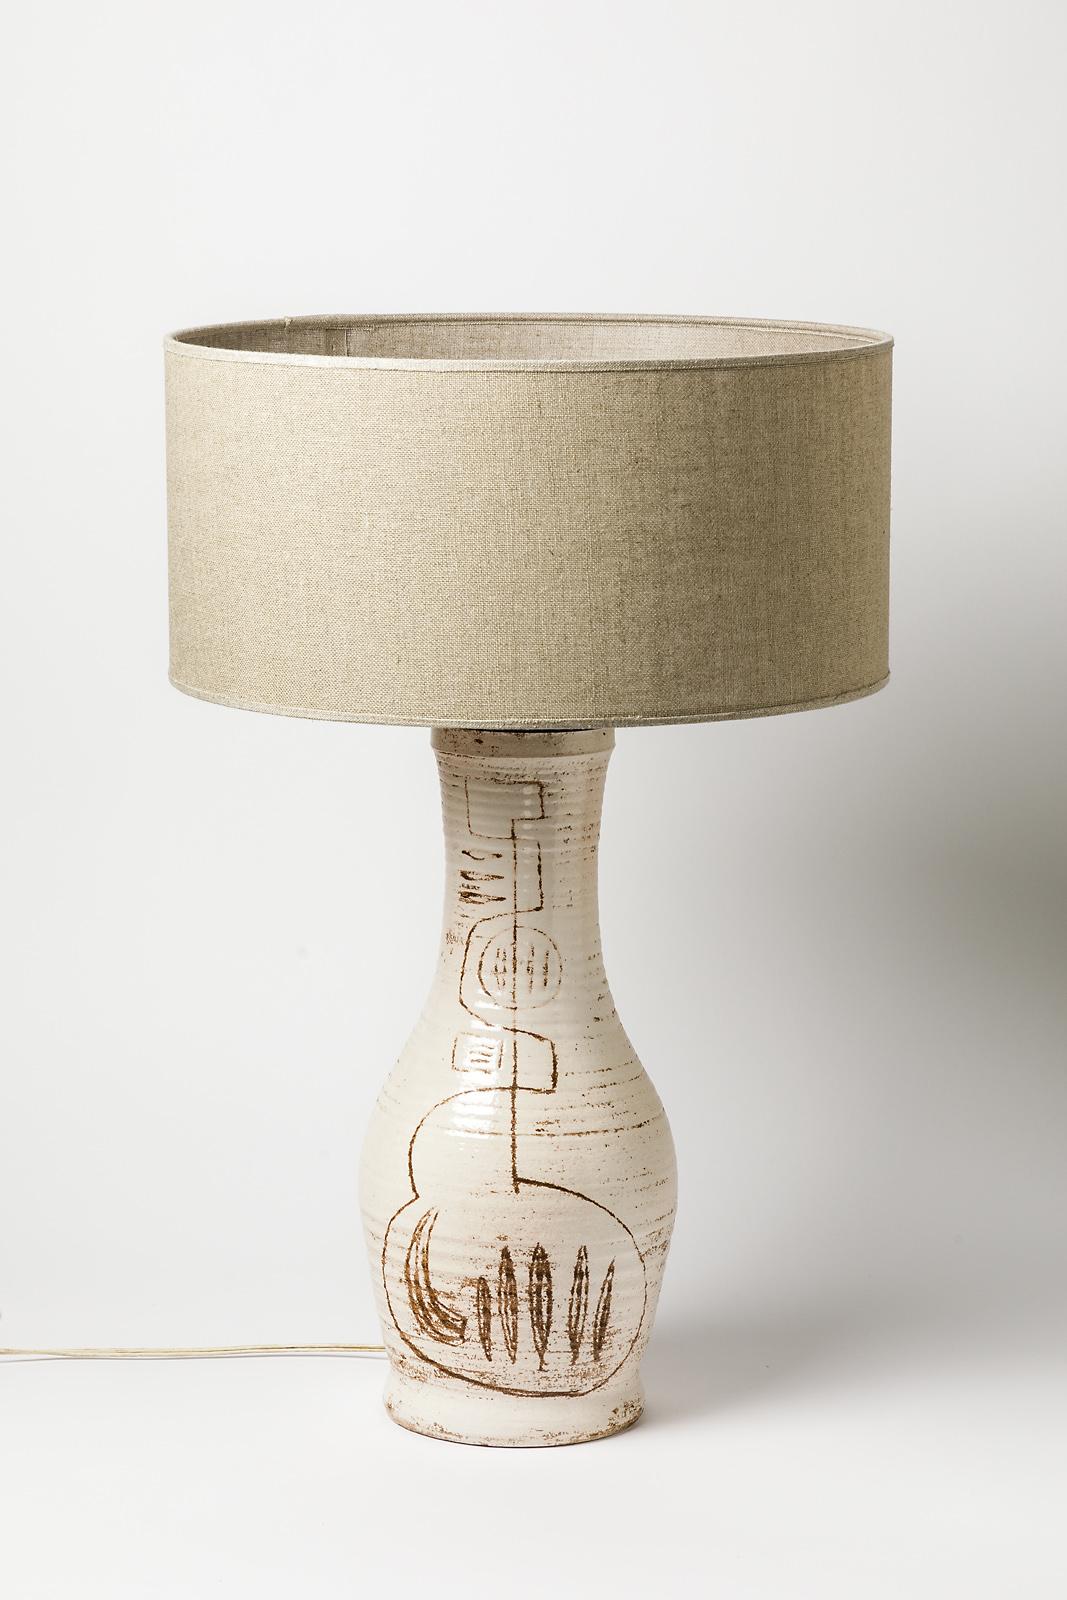 20th Century Midcentury White Abstract Ceramic Table Lamp by Accolay, French, 1950